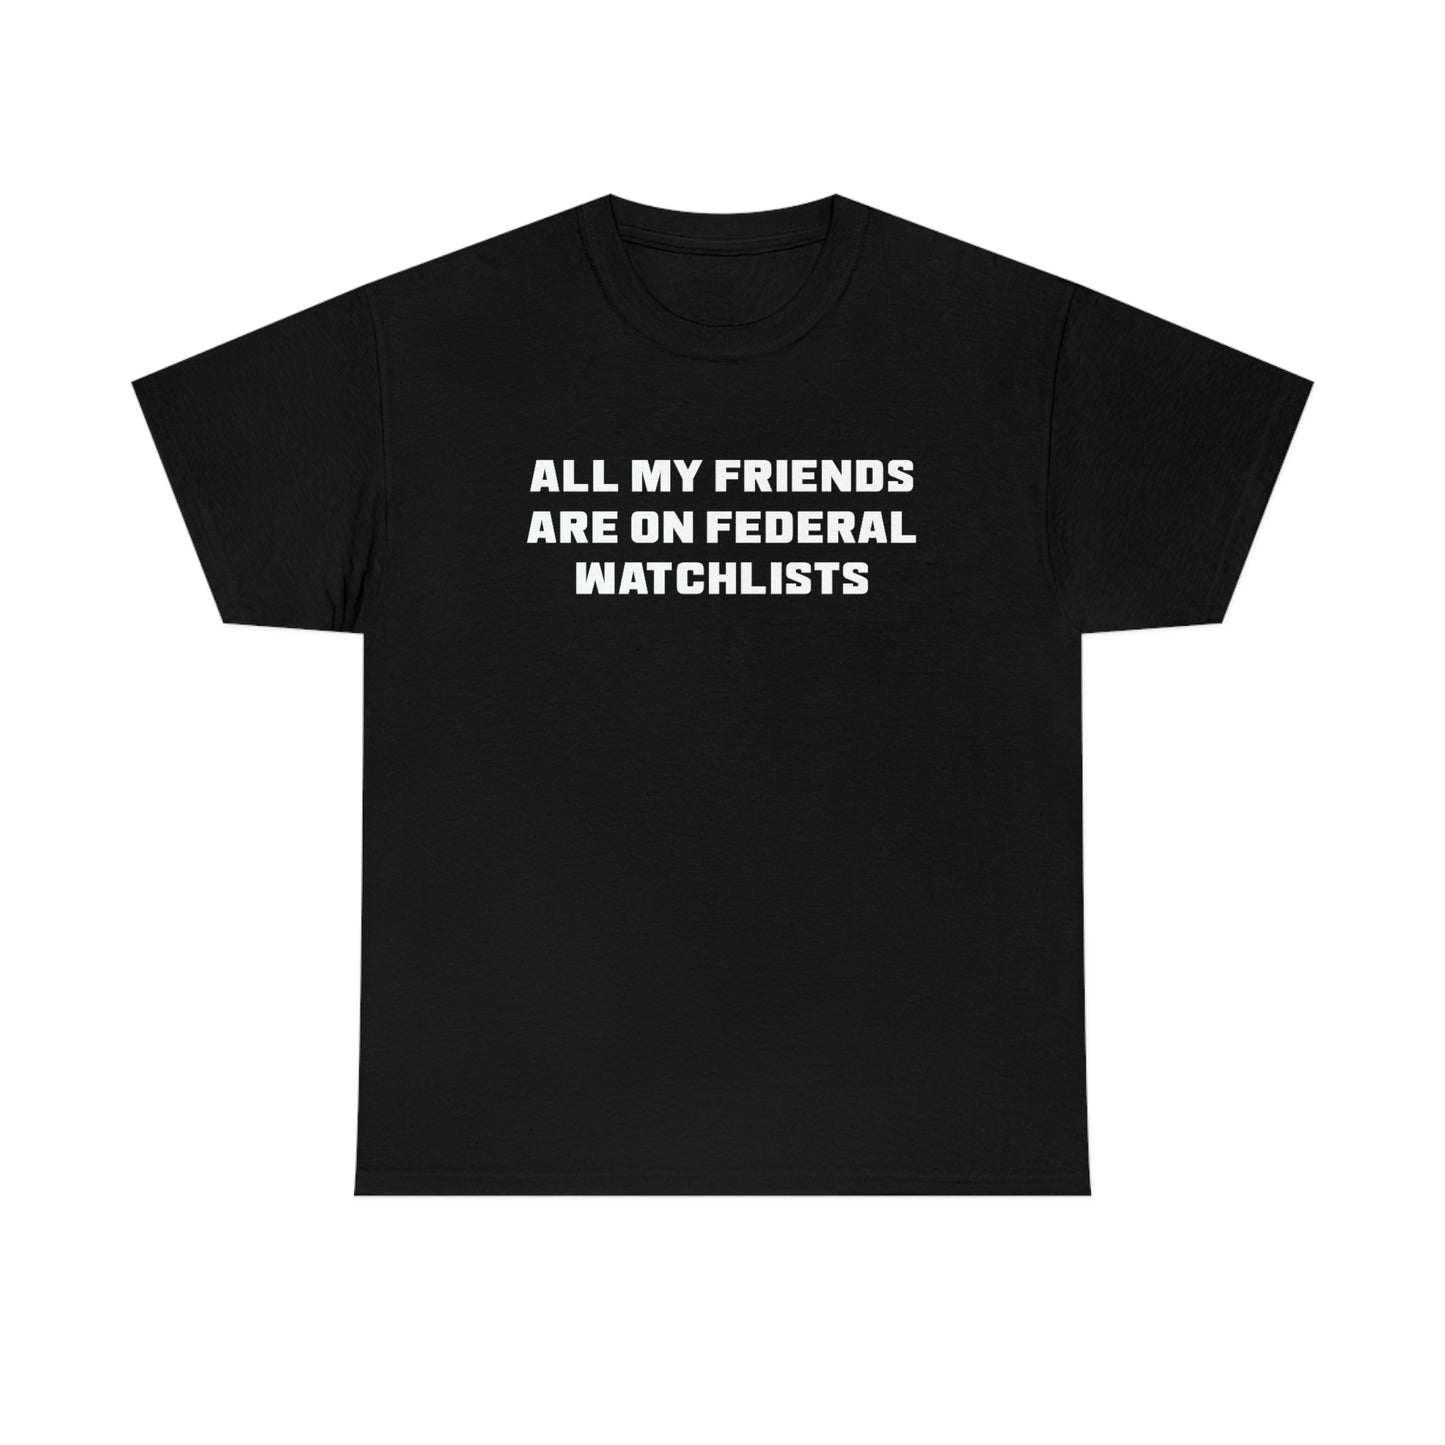 All My Friends Are on Federal Watchlists Tee